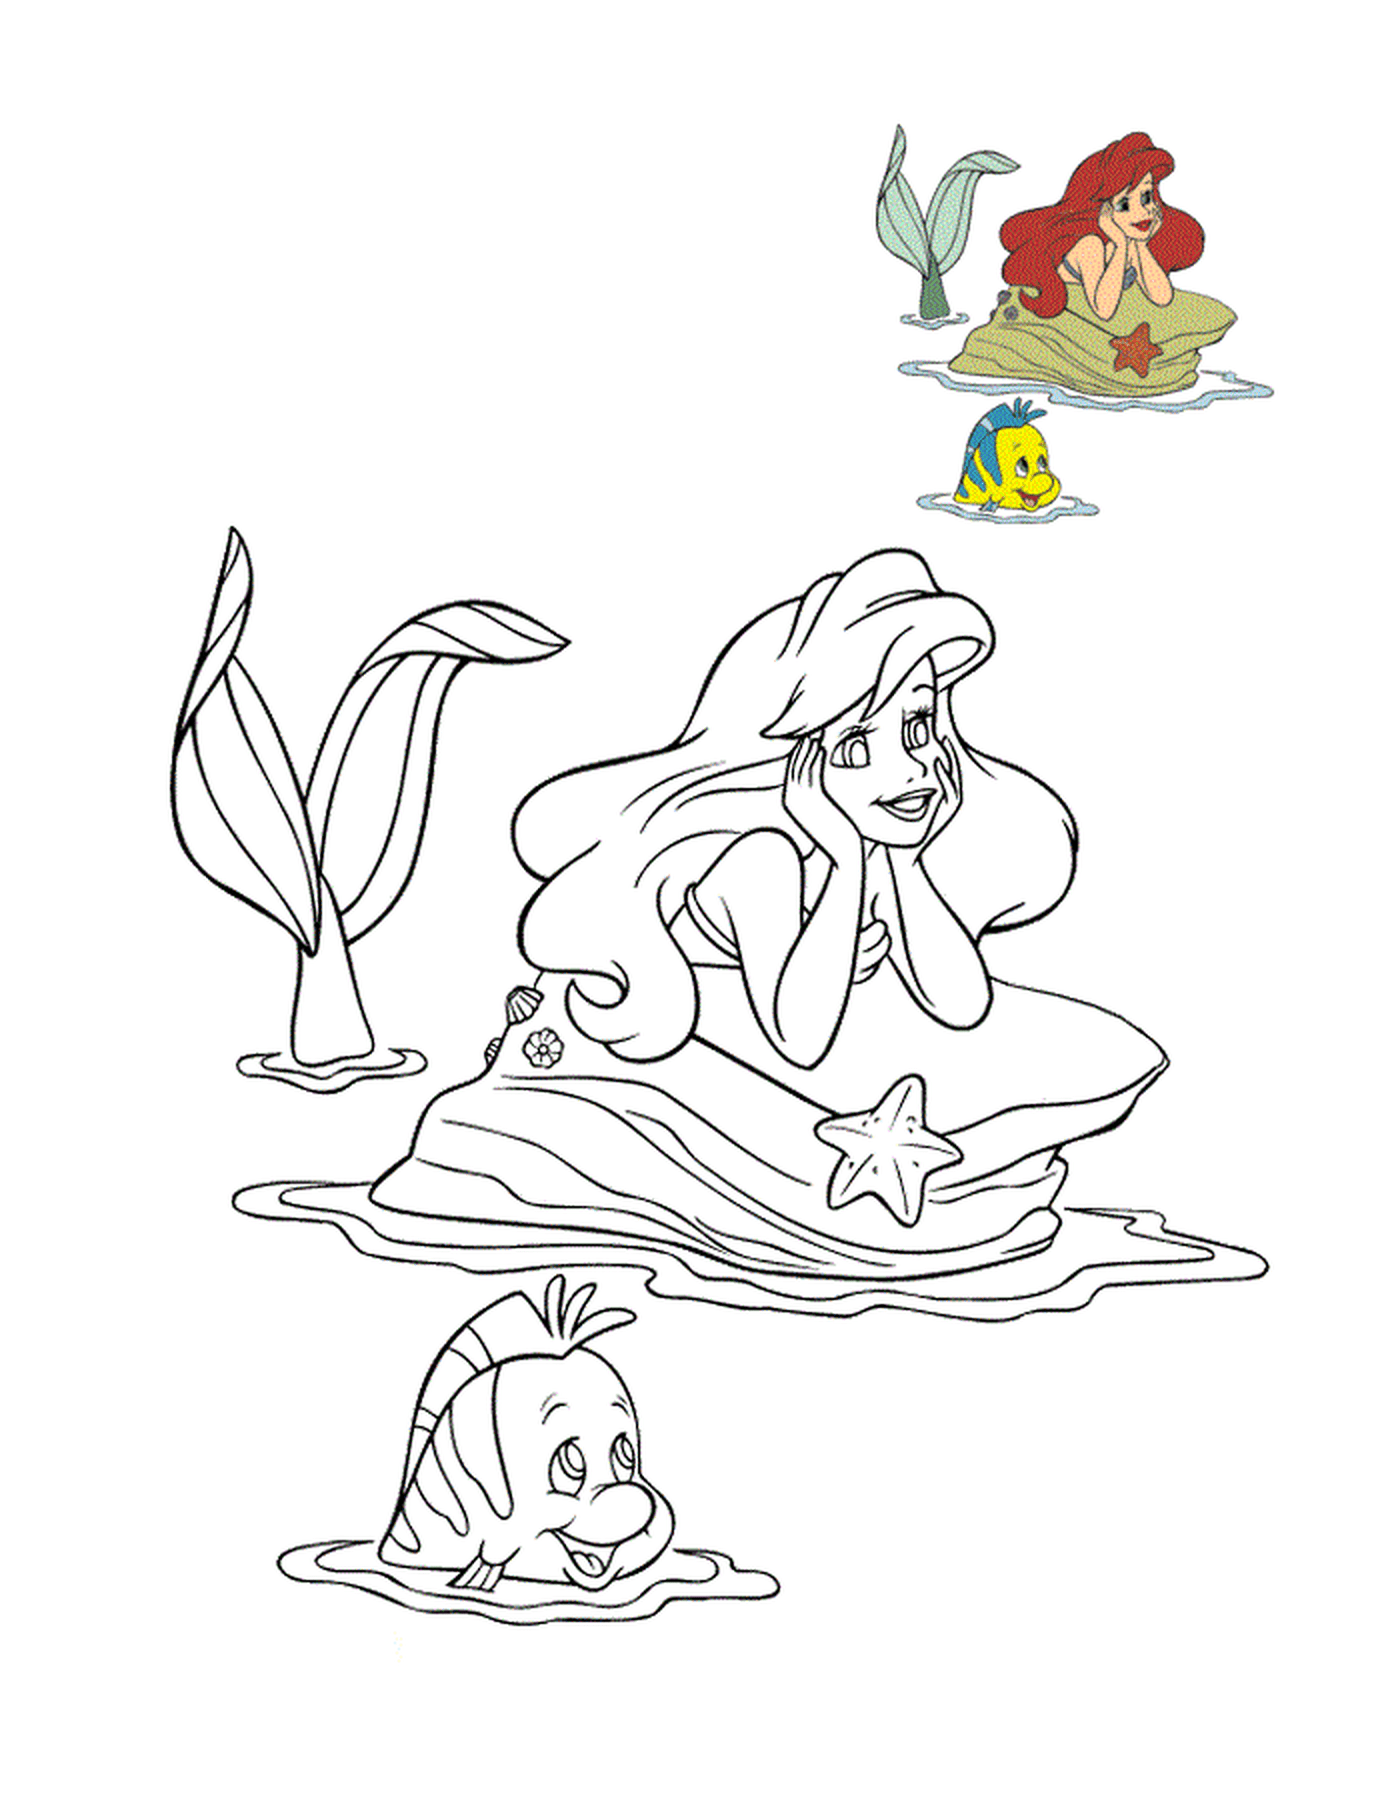  The Little Mermaid and Polochon 